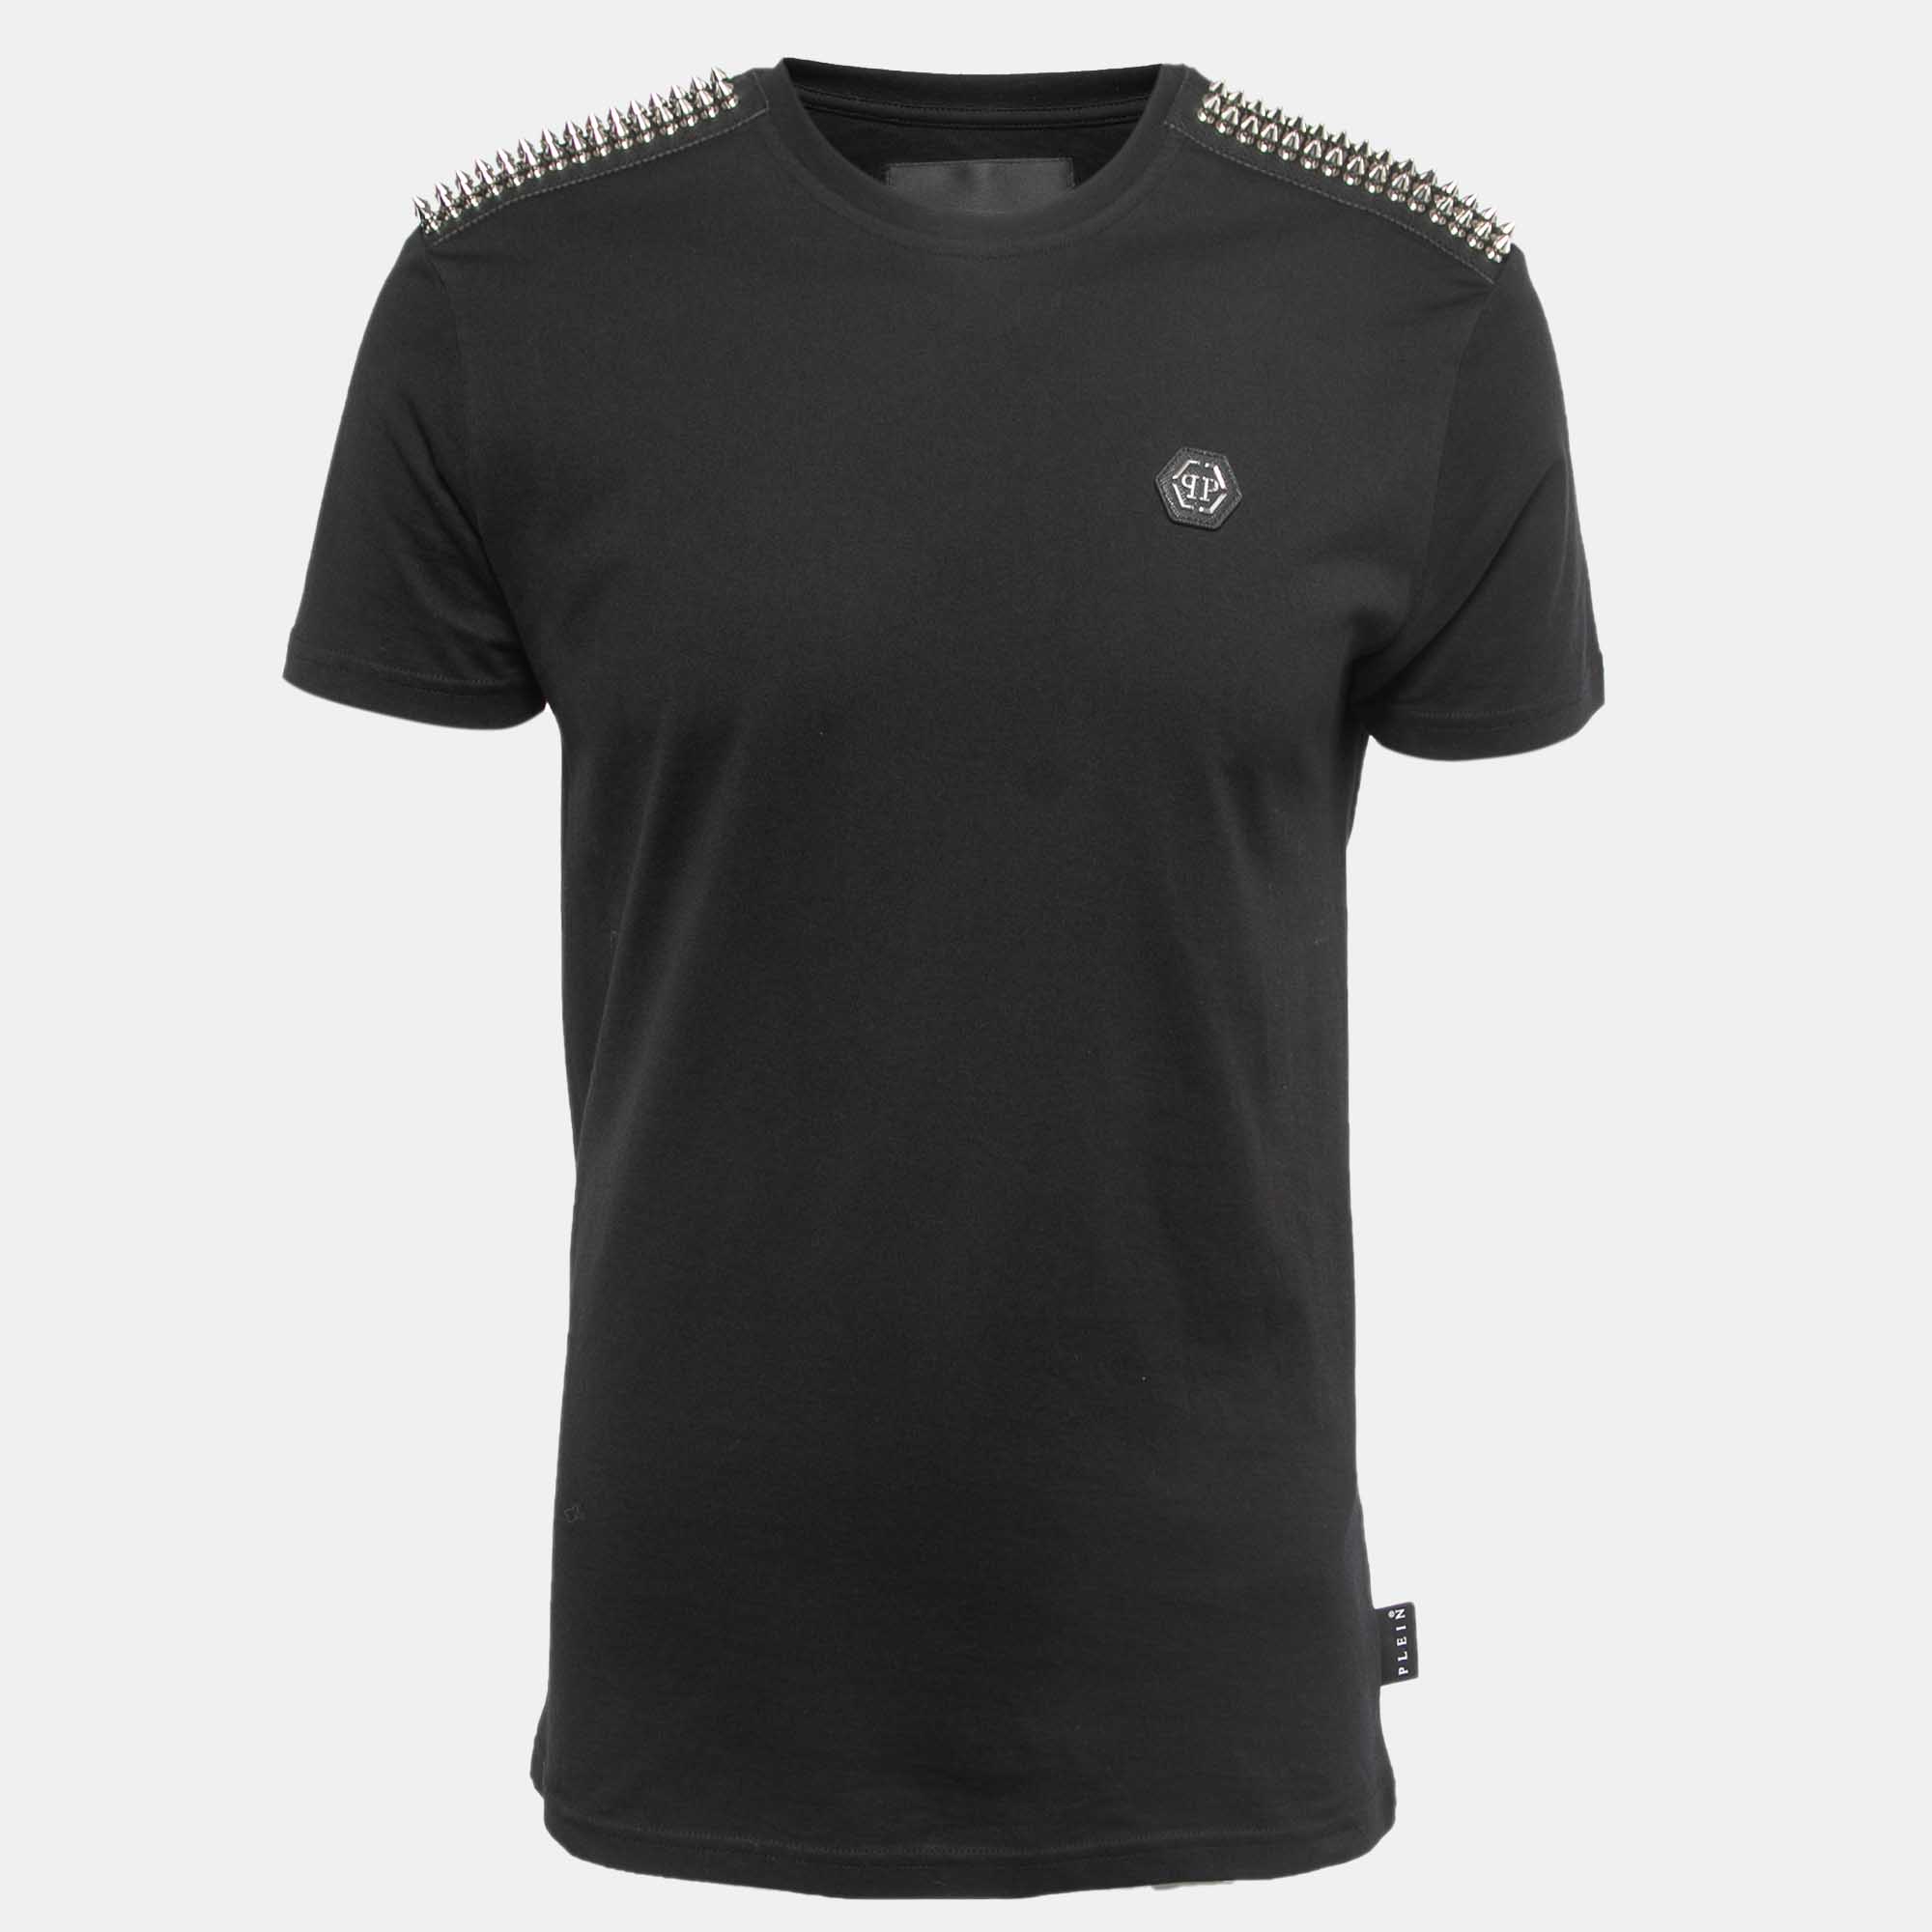 Homme Black Spiked Cotton Neck T-Shirt